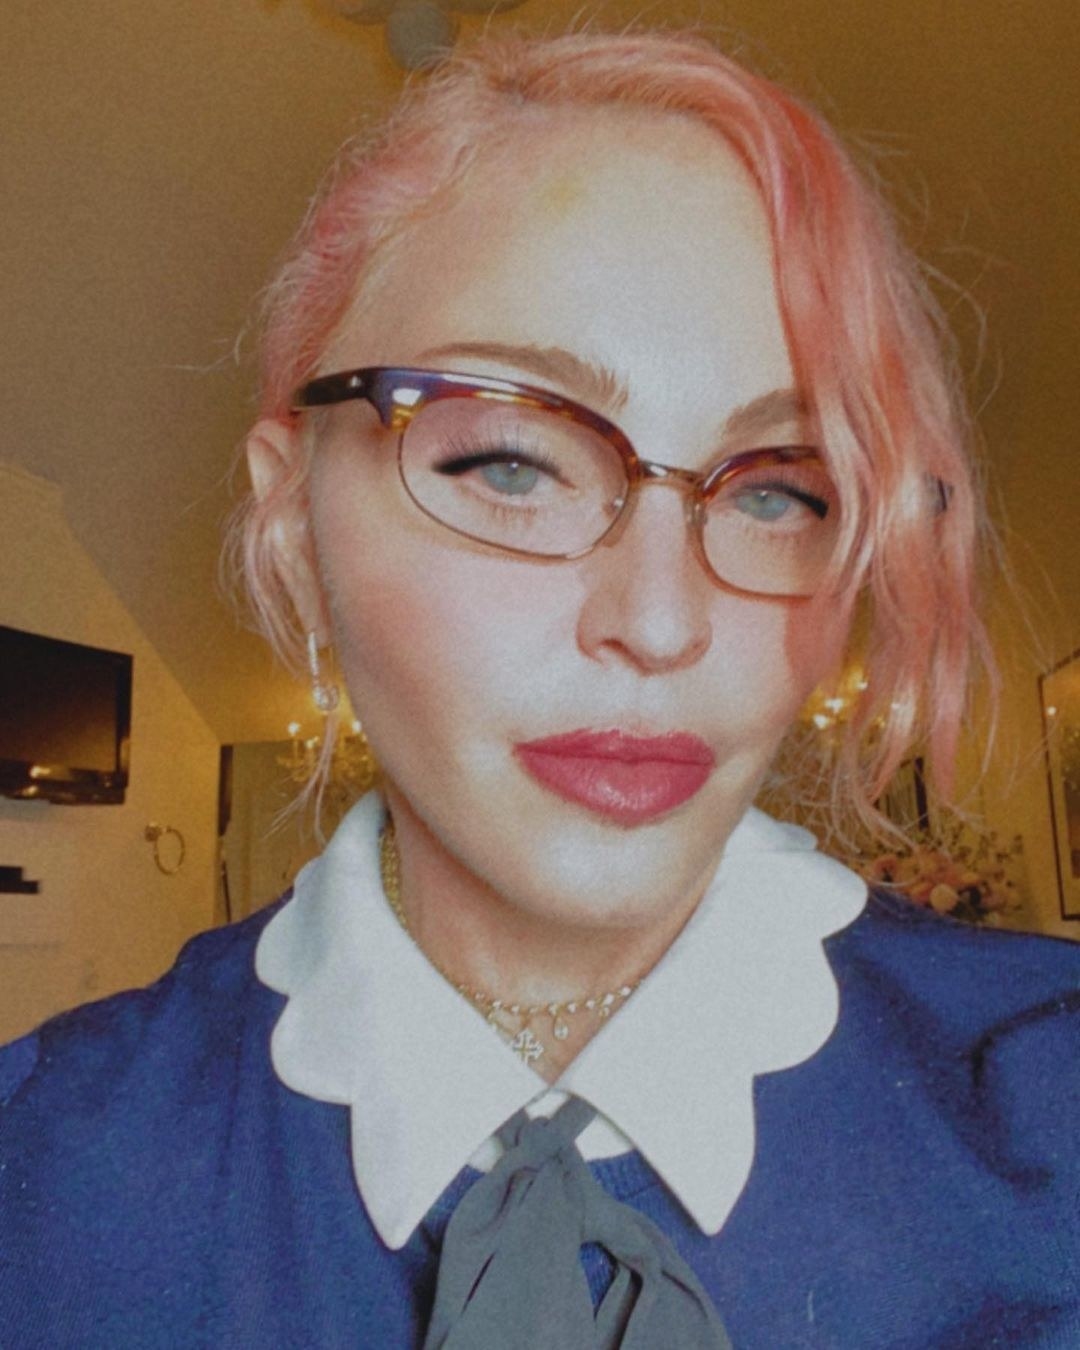 Madonna taking a selfie in quarantine while wearing glasses and pink hair